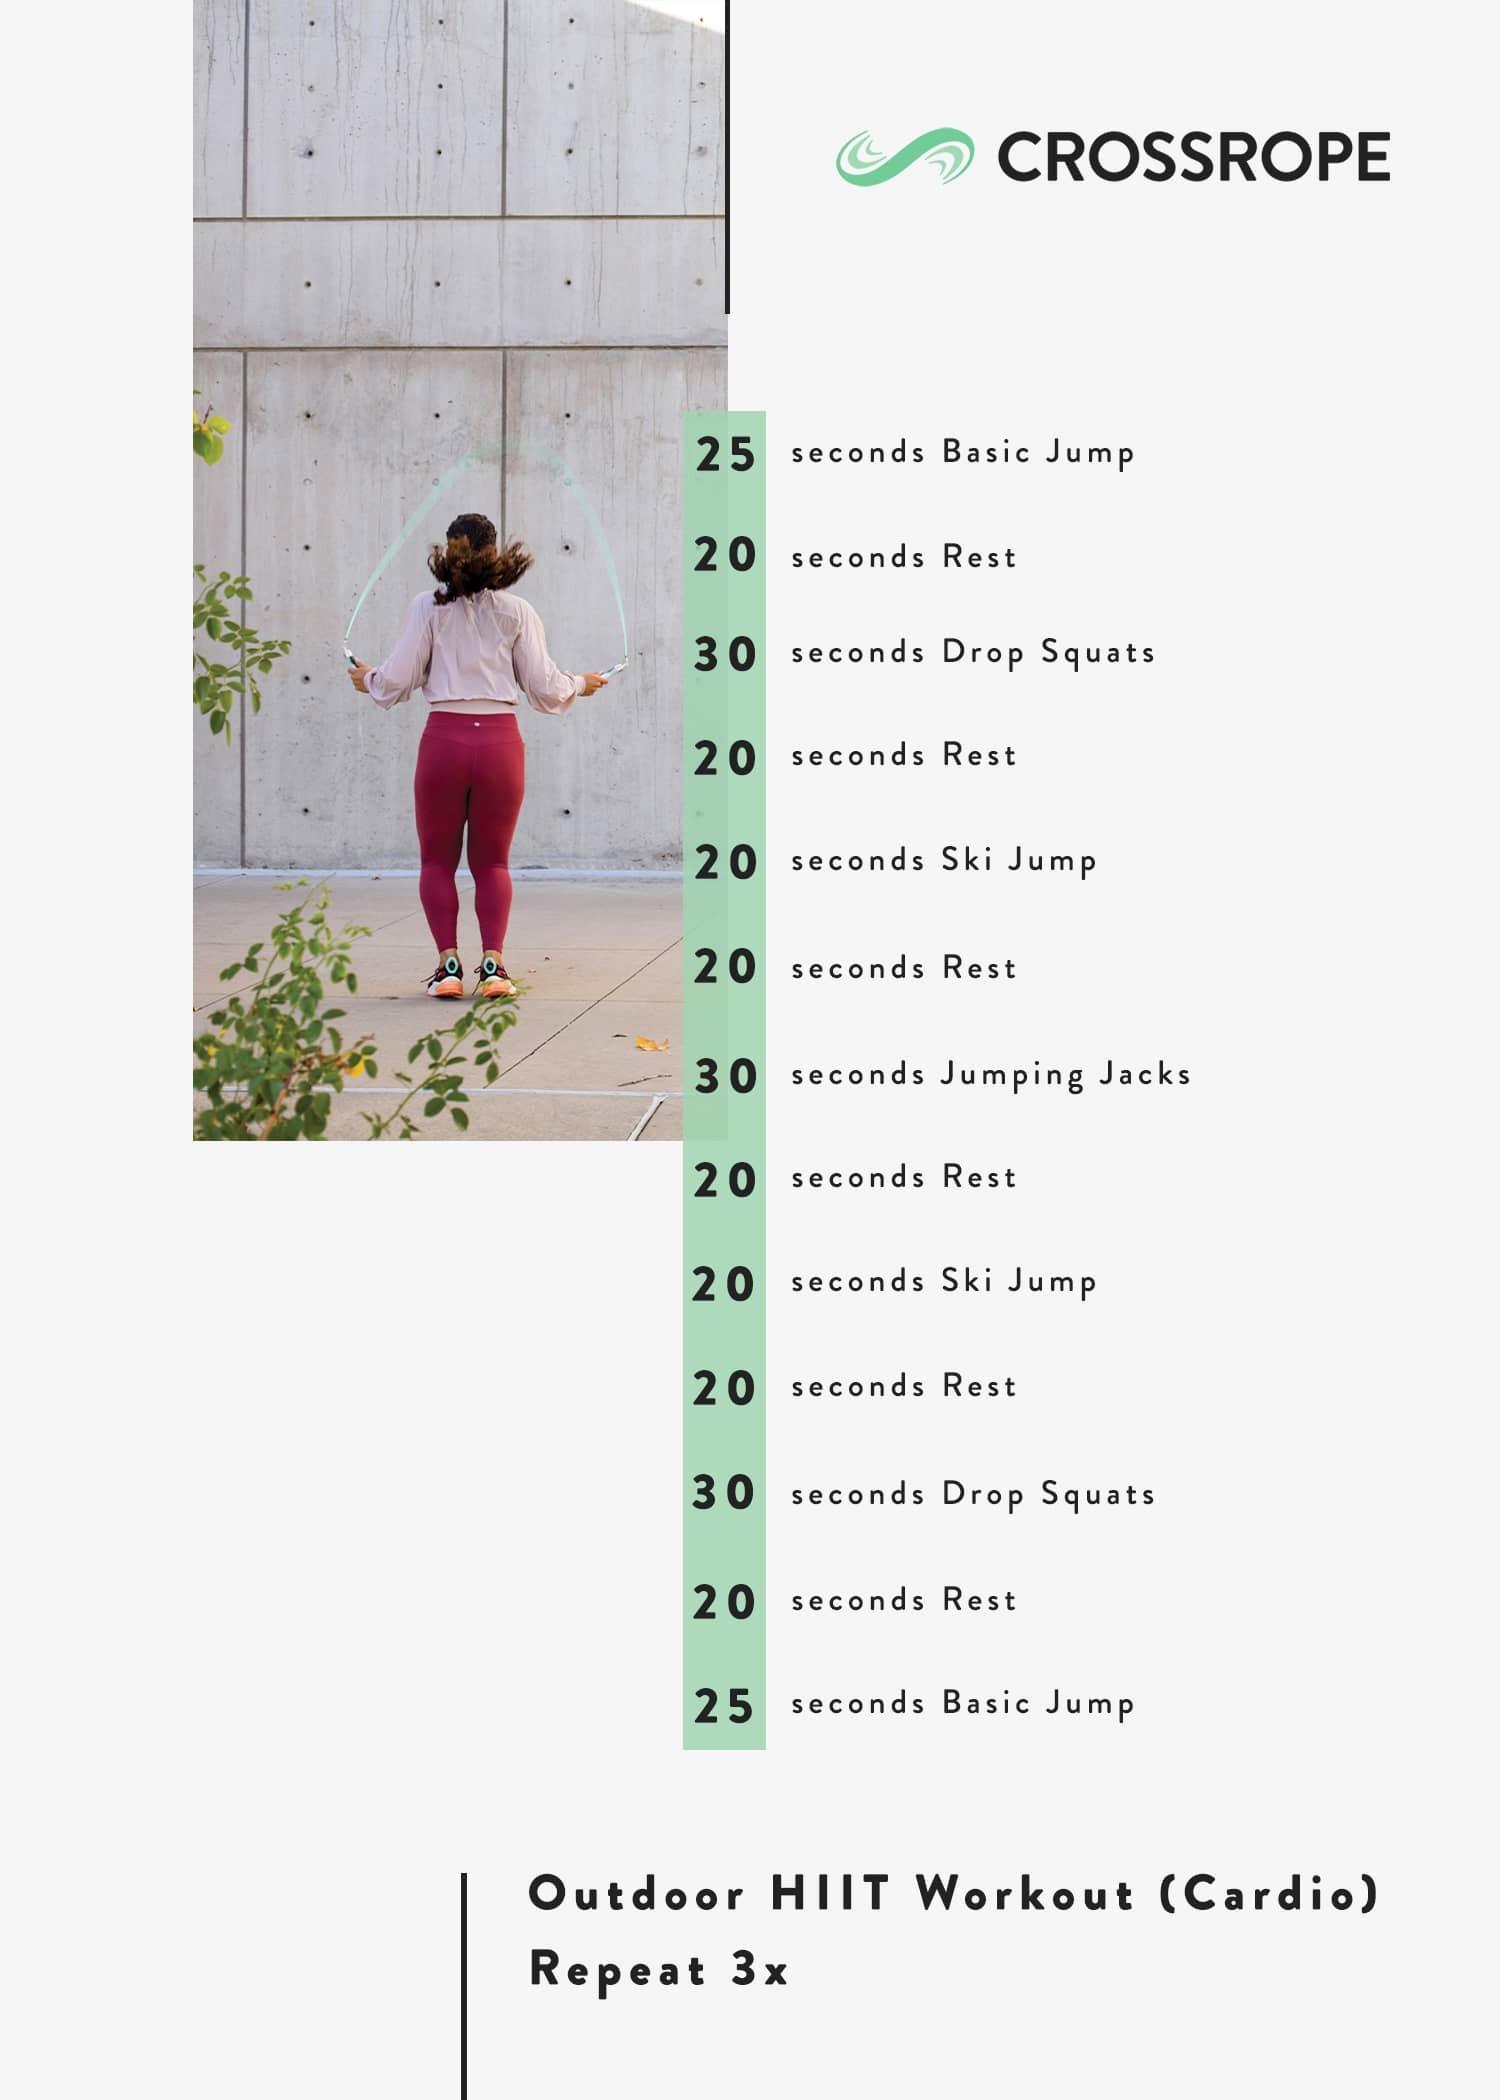 20+ Outdoor Workouts: Strength + Cardio Anywhere